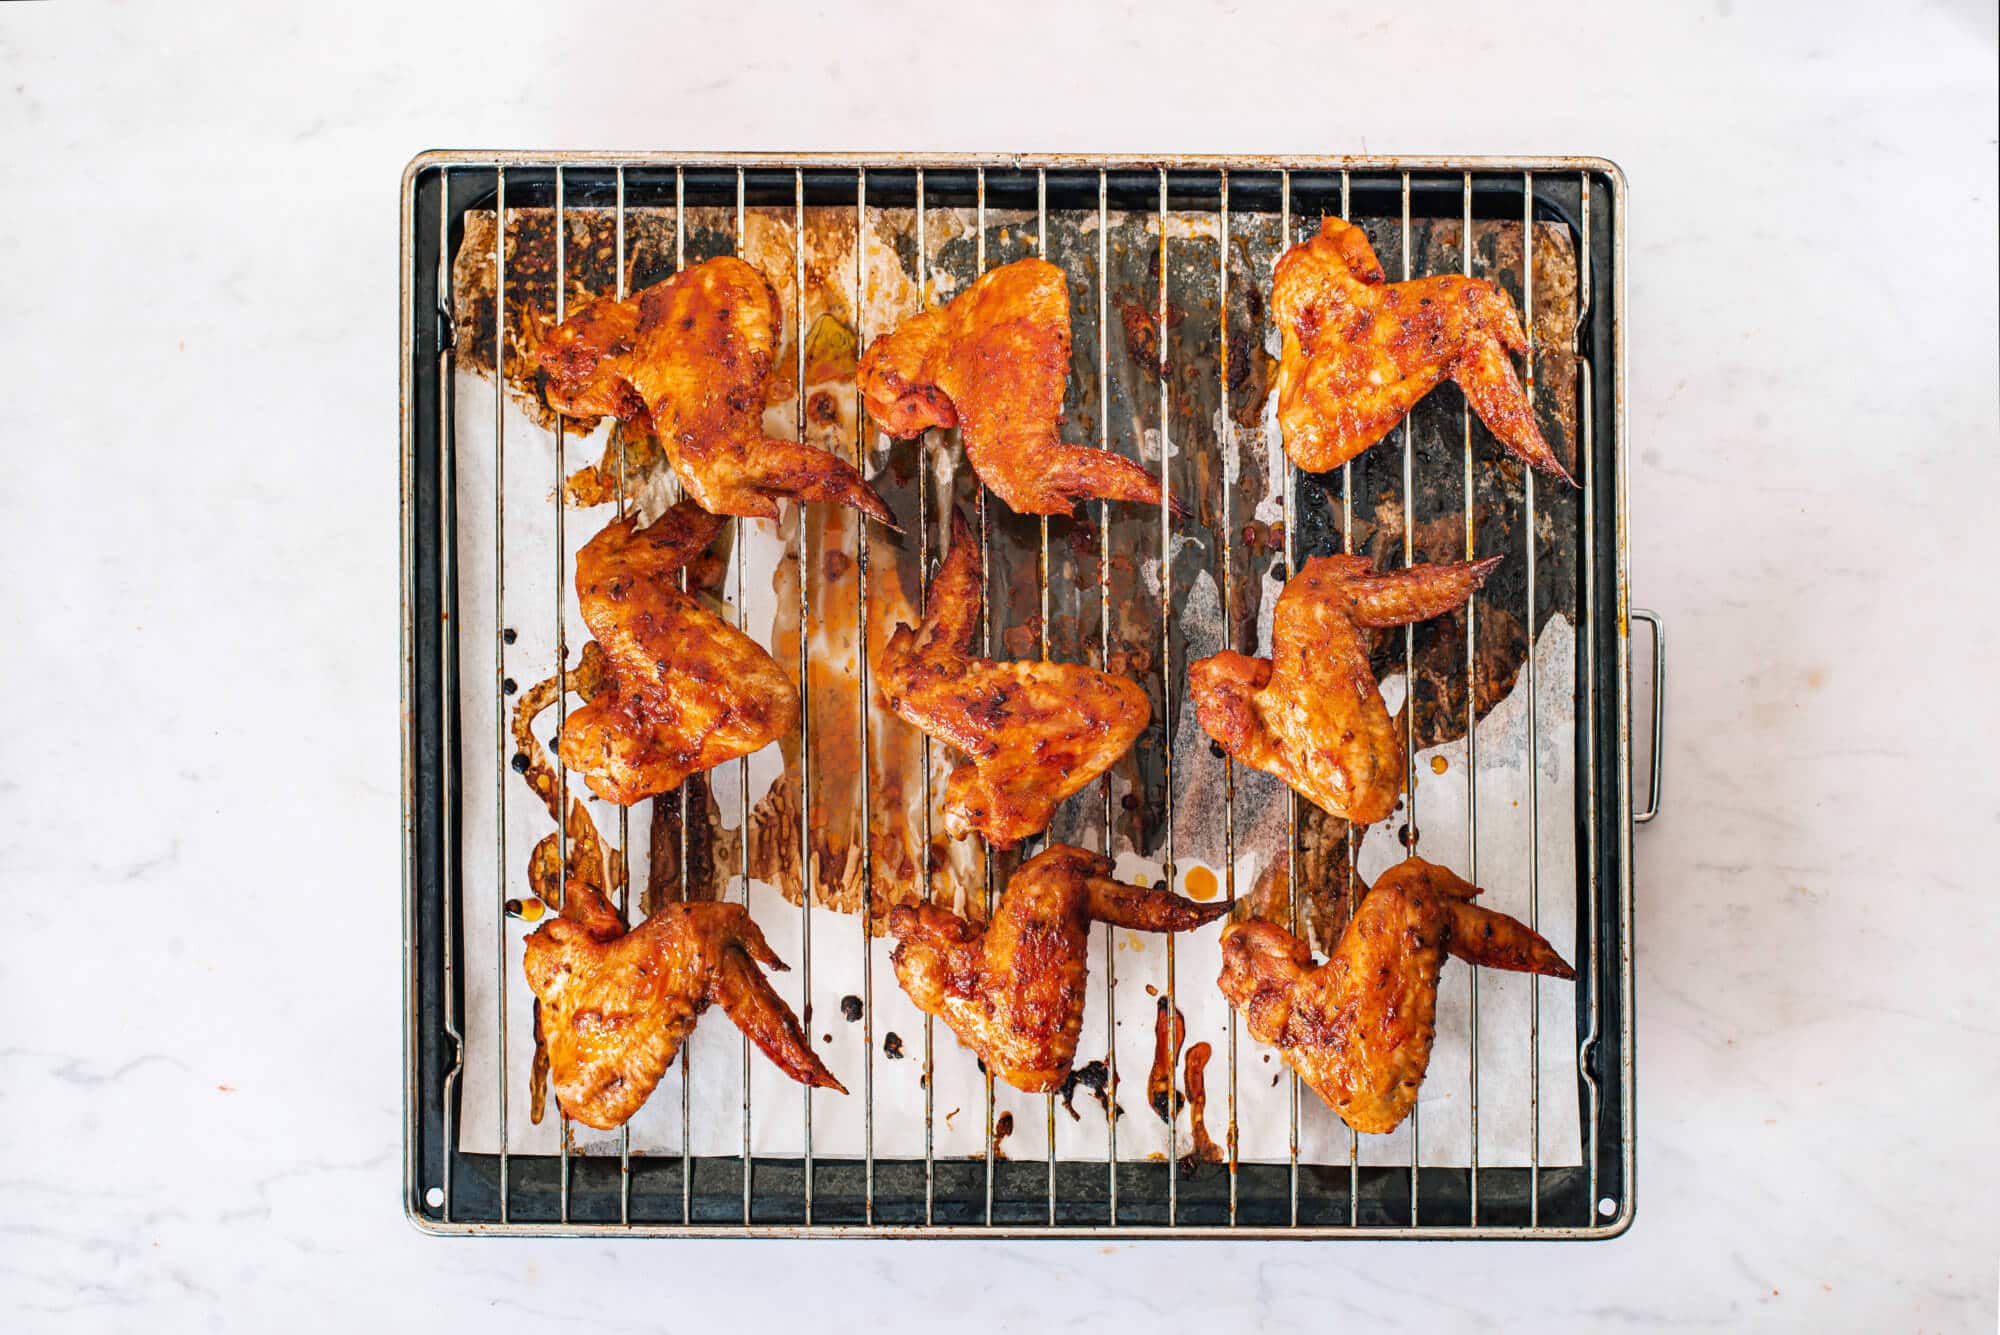 baked-chicken-wings-on-a-wire-rack-on-a-baking-tray